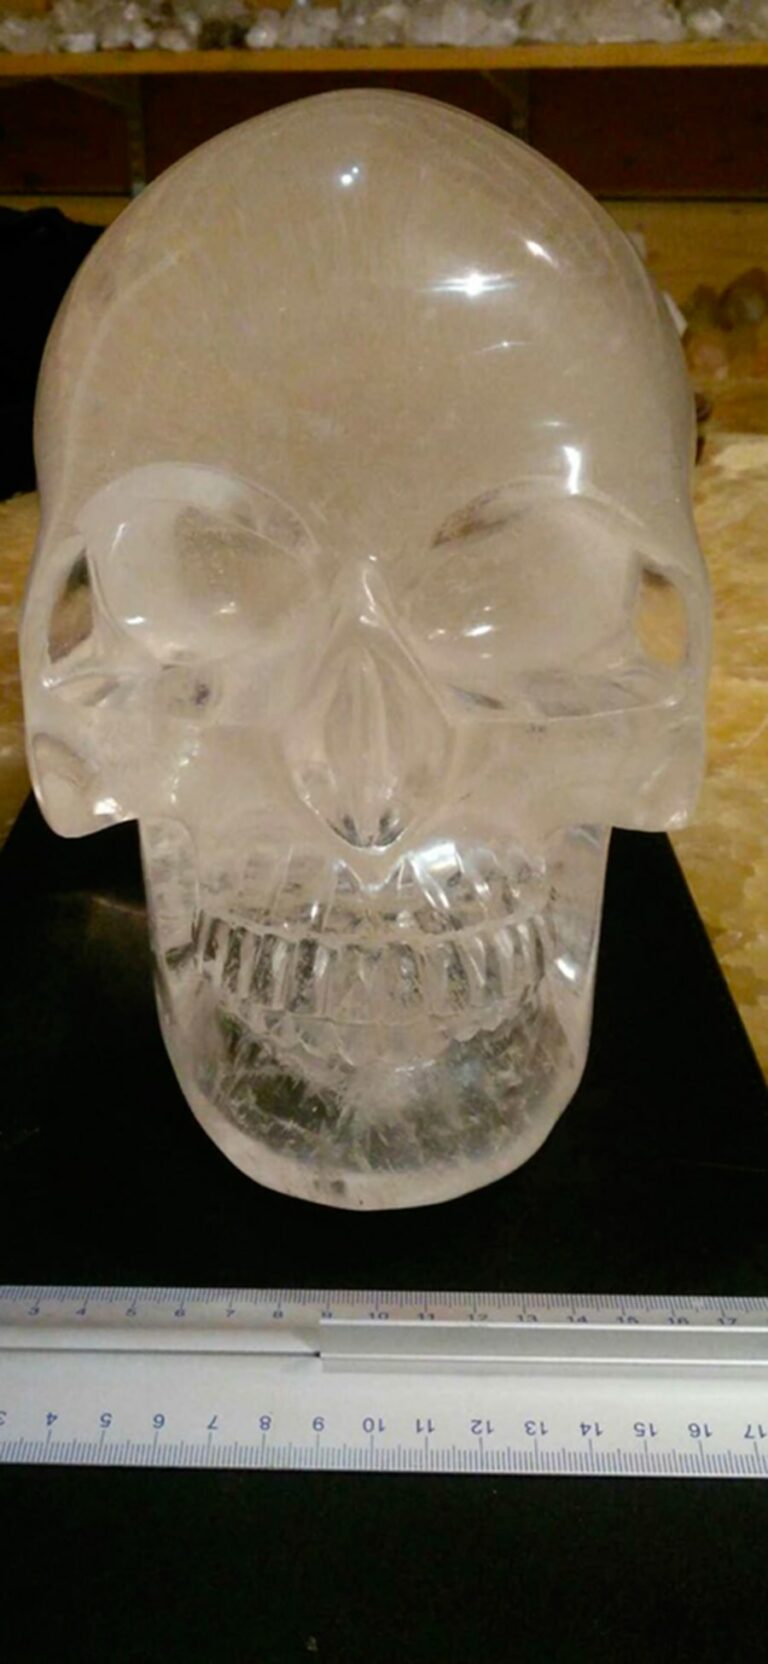 Majestic Himalayan skull with millennial water drop